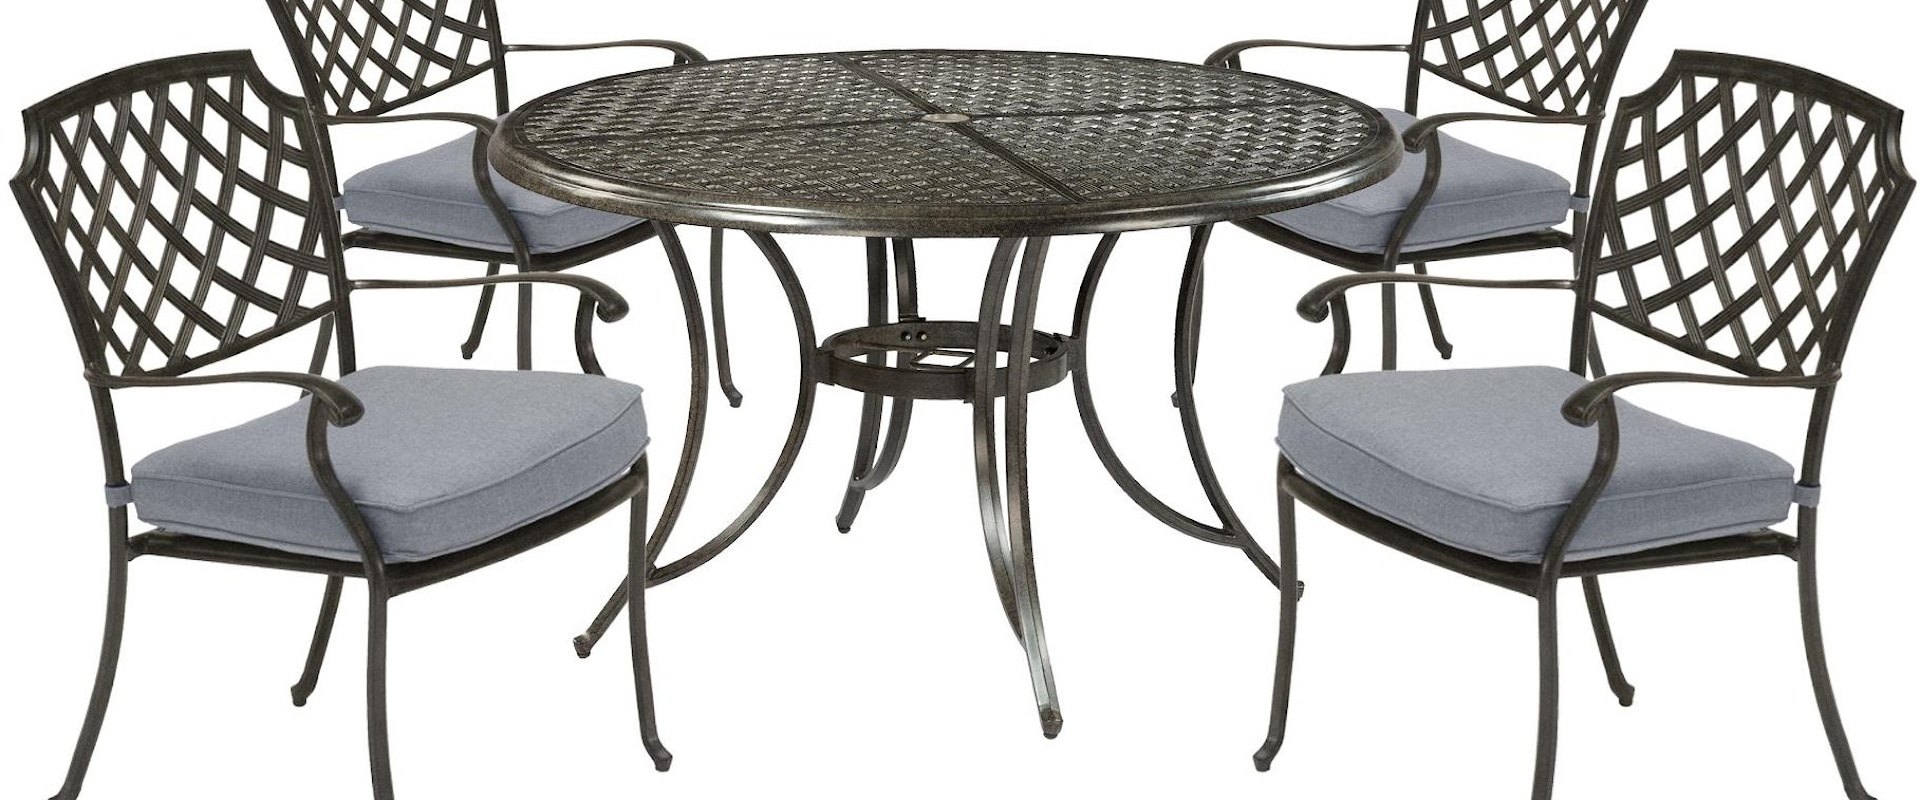 48 Inch Round Table And 4 Chairs With Seat Cushions